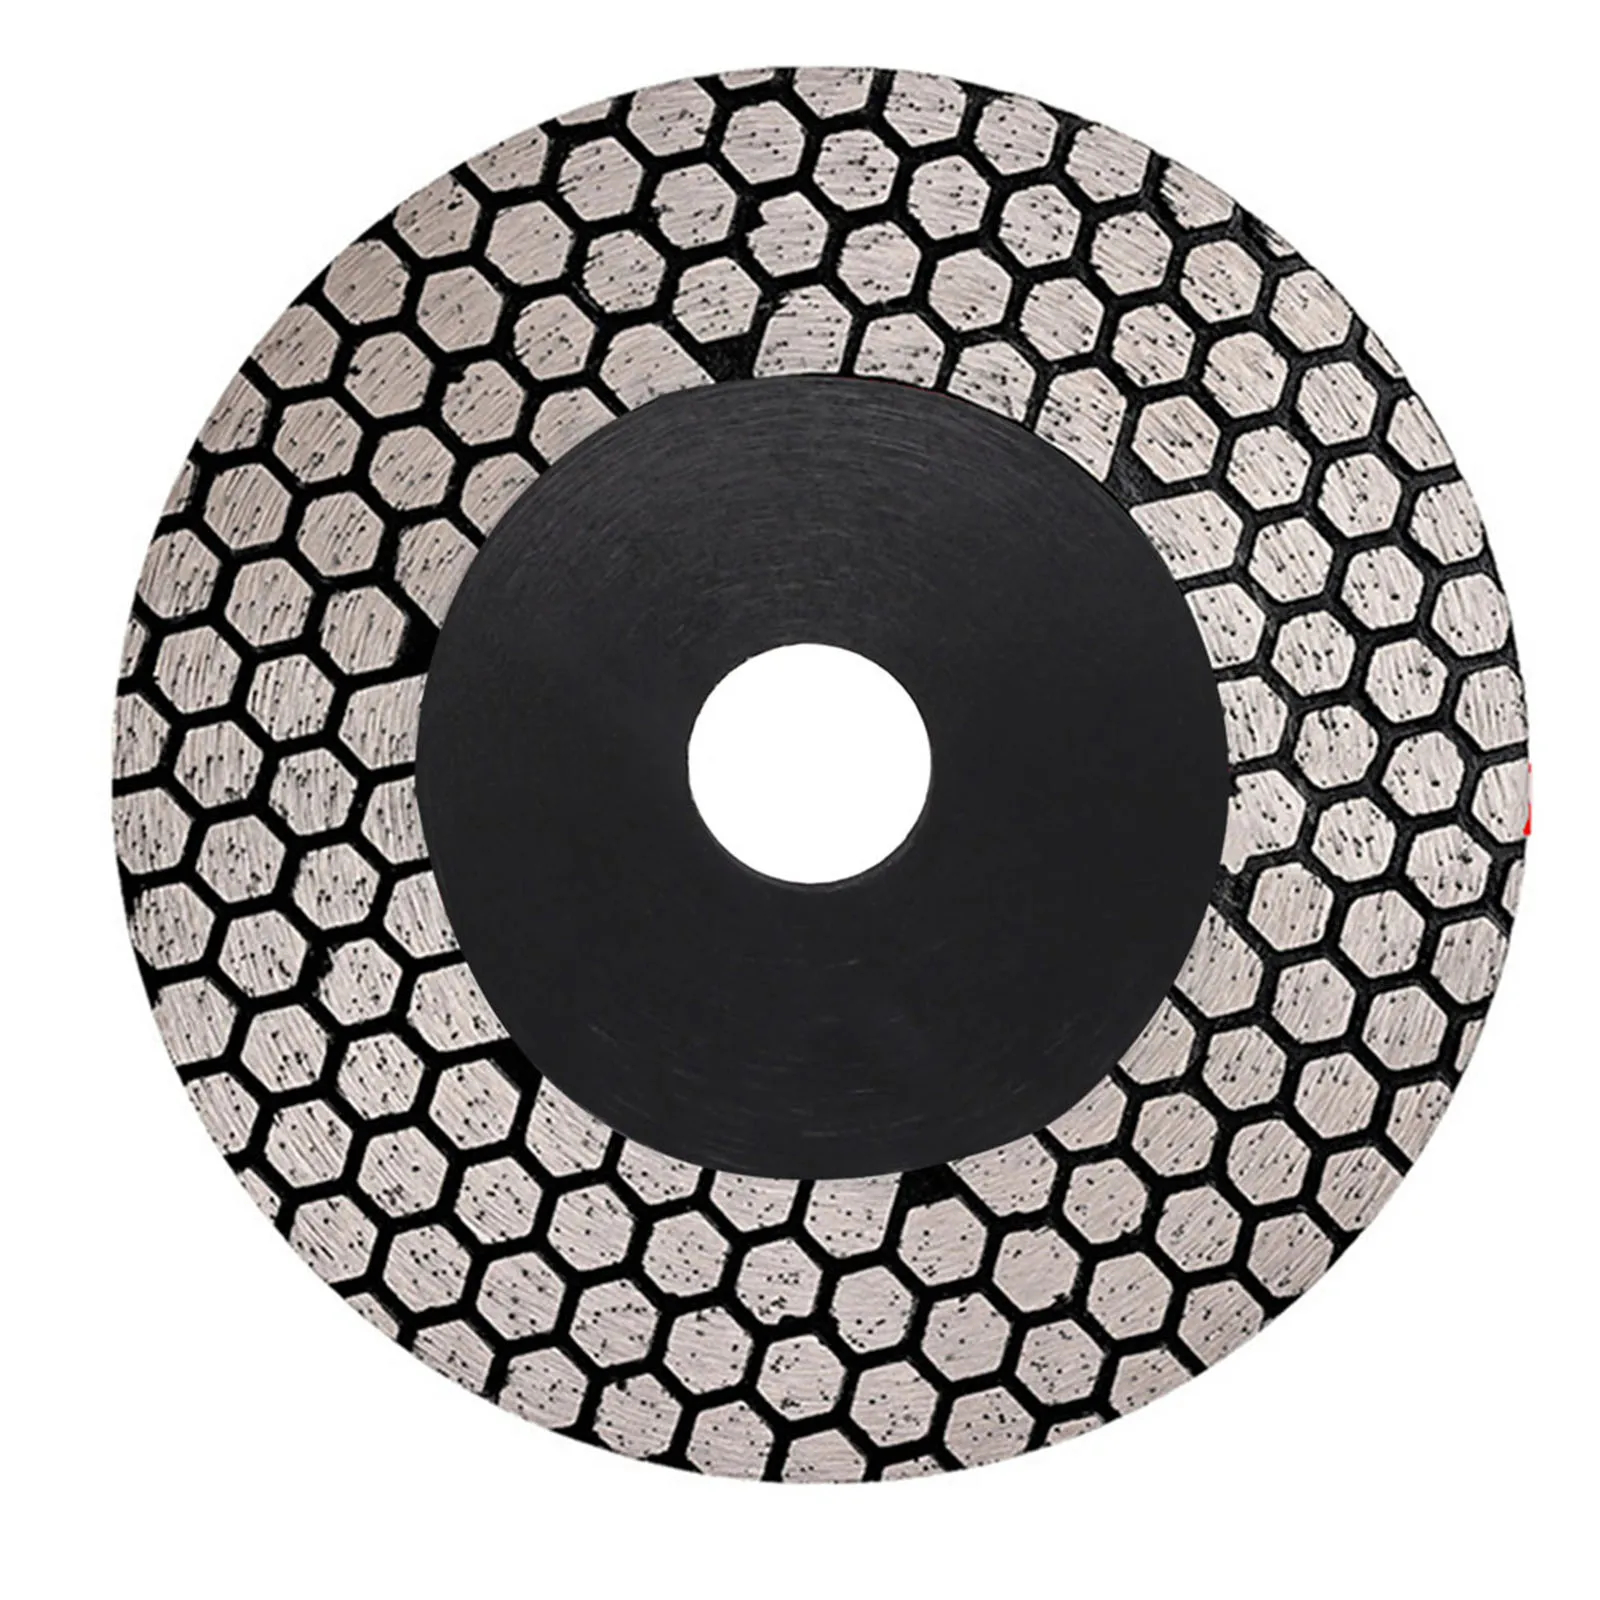 

1Pc Diamond Saw Blade Tile Cutting Grinding Disc Wheel 115/125mm 22.23mm 60/70 Grit For Porcelain Ceramic Marble Granite Cutter